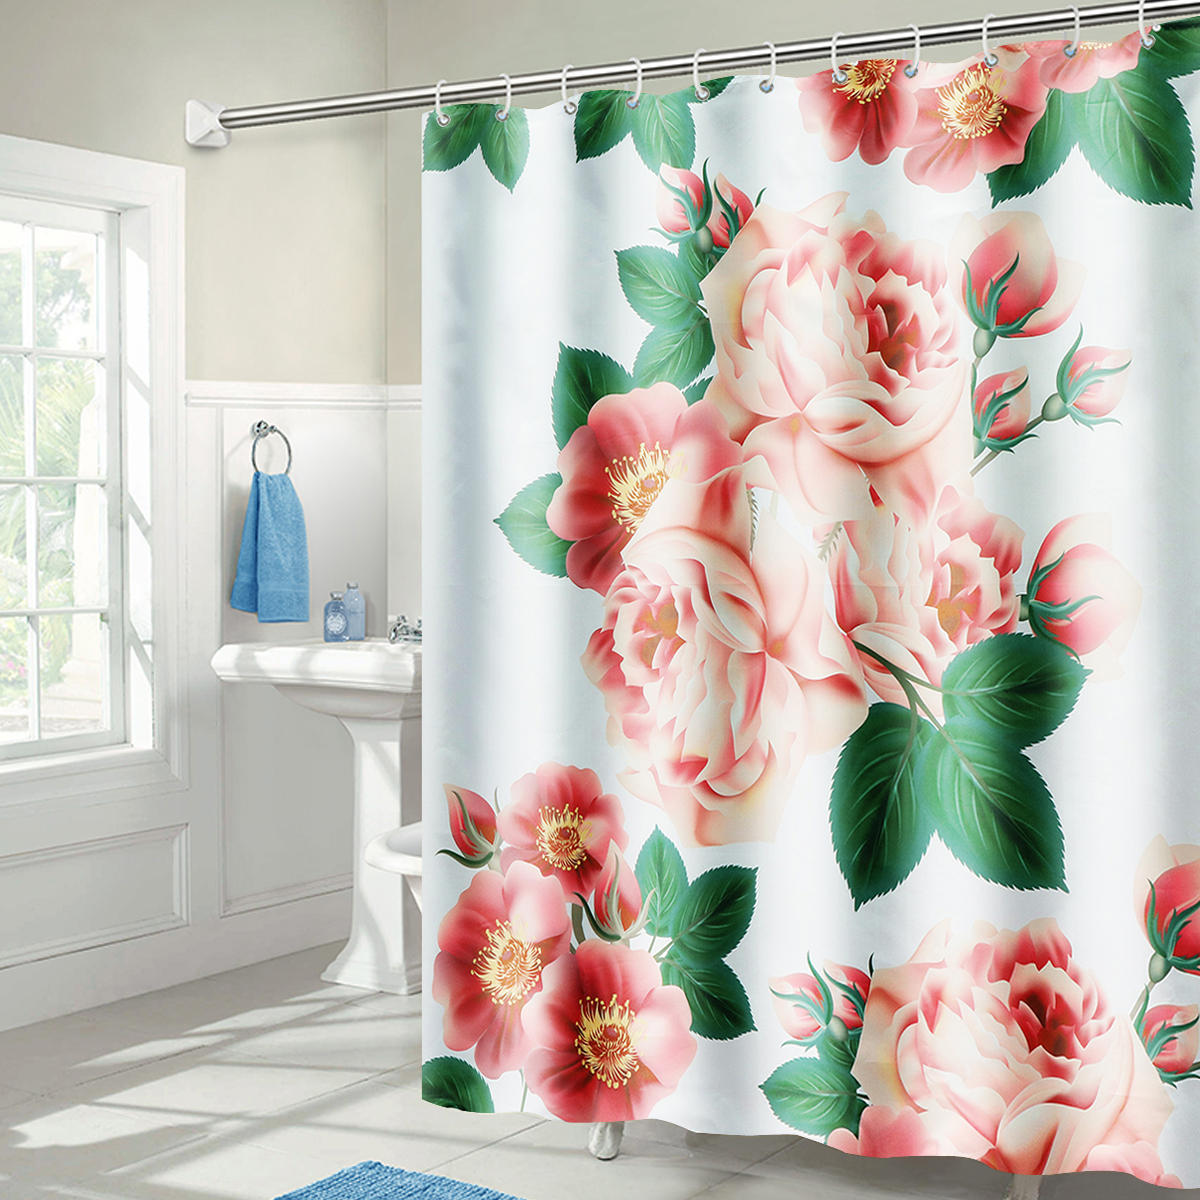 71''x71'' Long Peach Blossom Pattern Waterproof Polyester Shower Curtain with Hooks